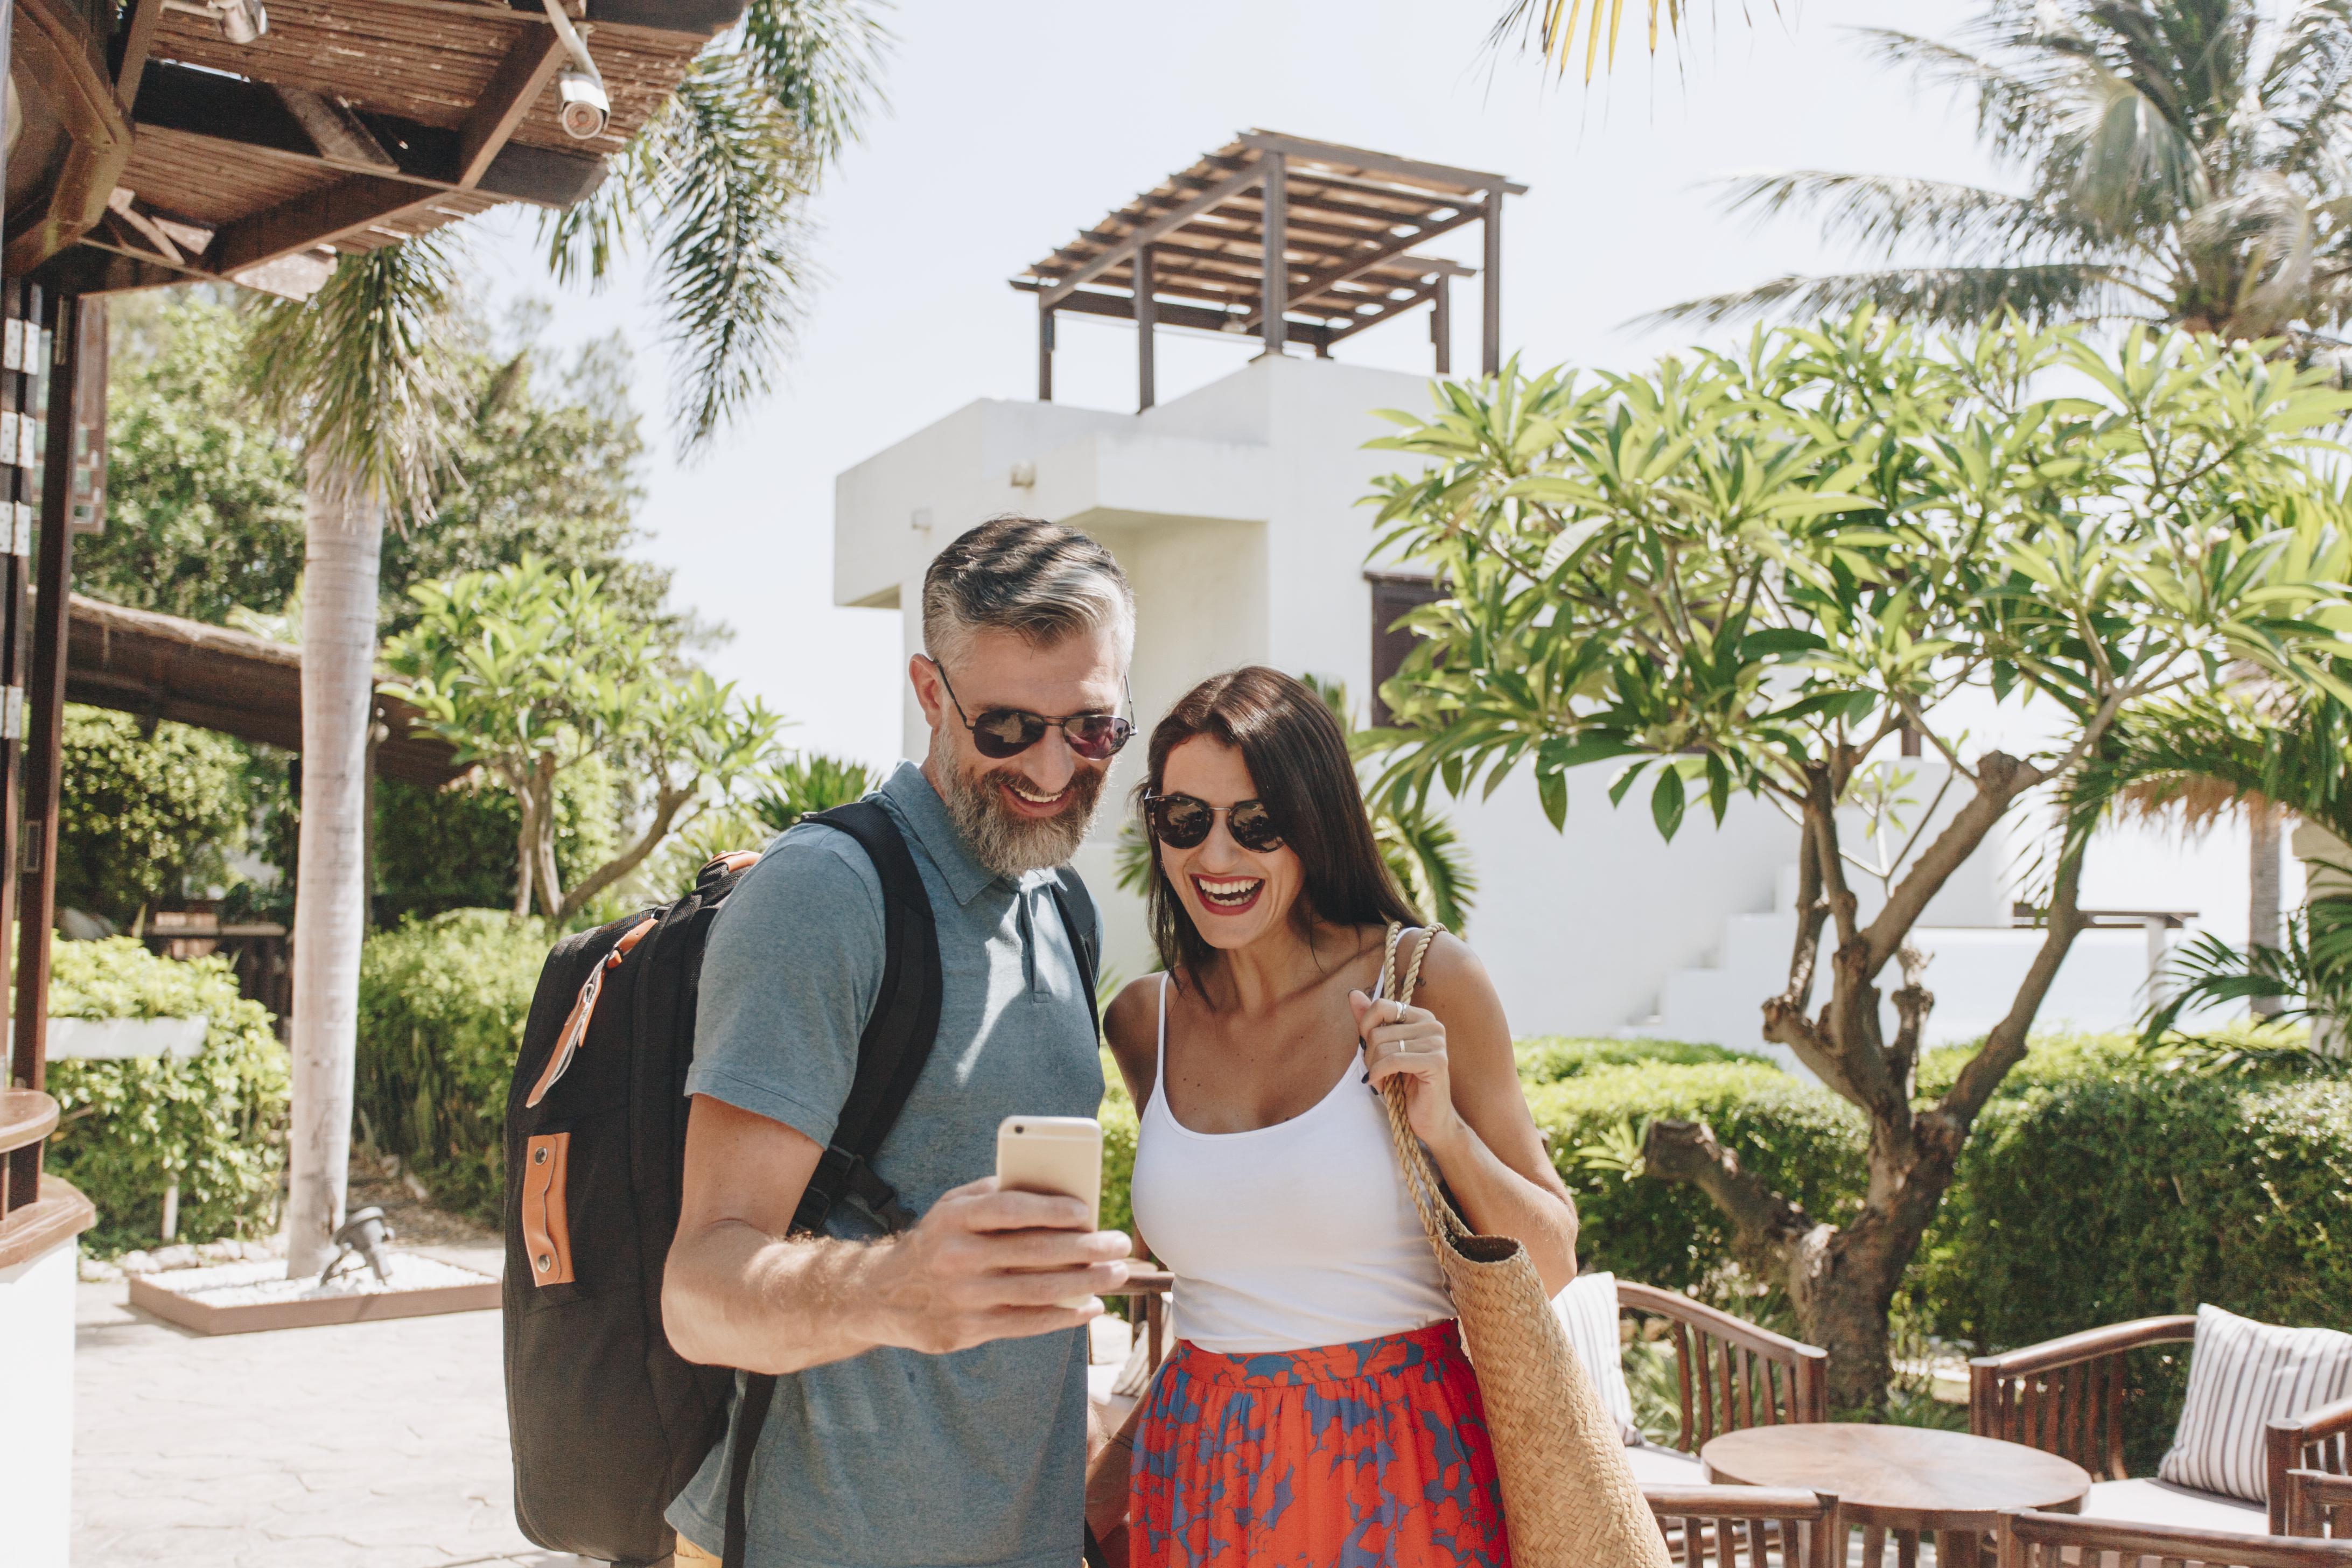 PLANNING A ROMANTIC GETAWAY FOR TWO – ON A BUDGET